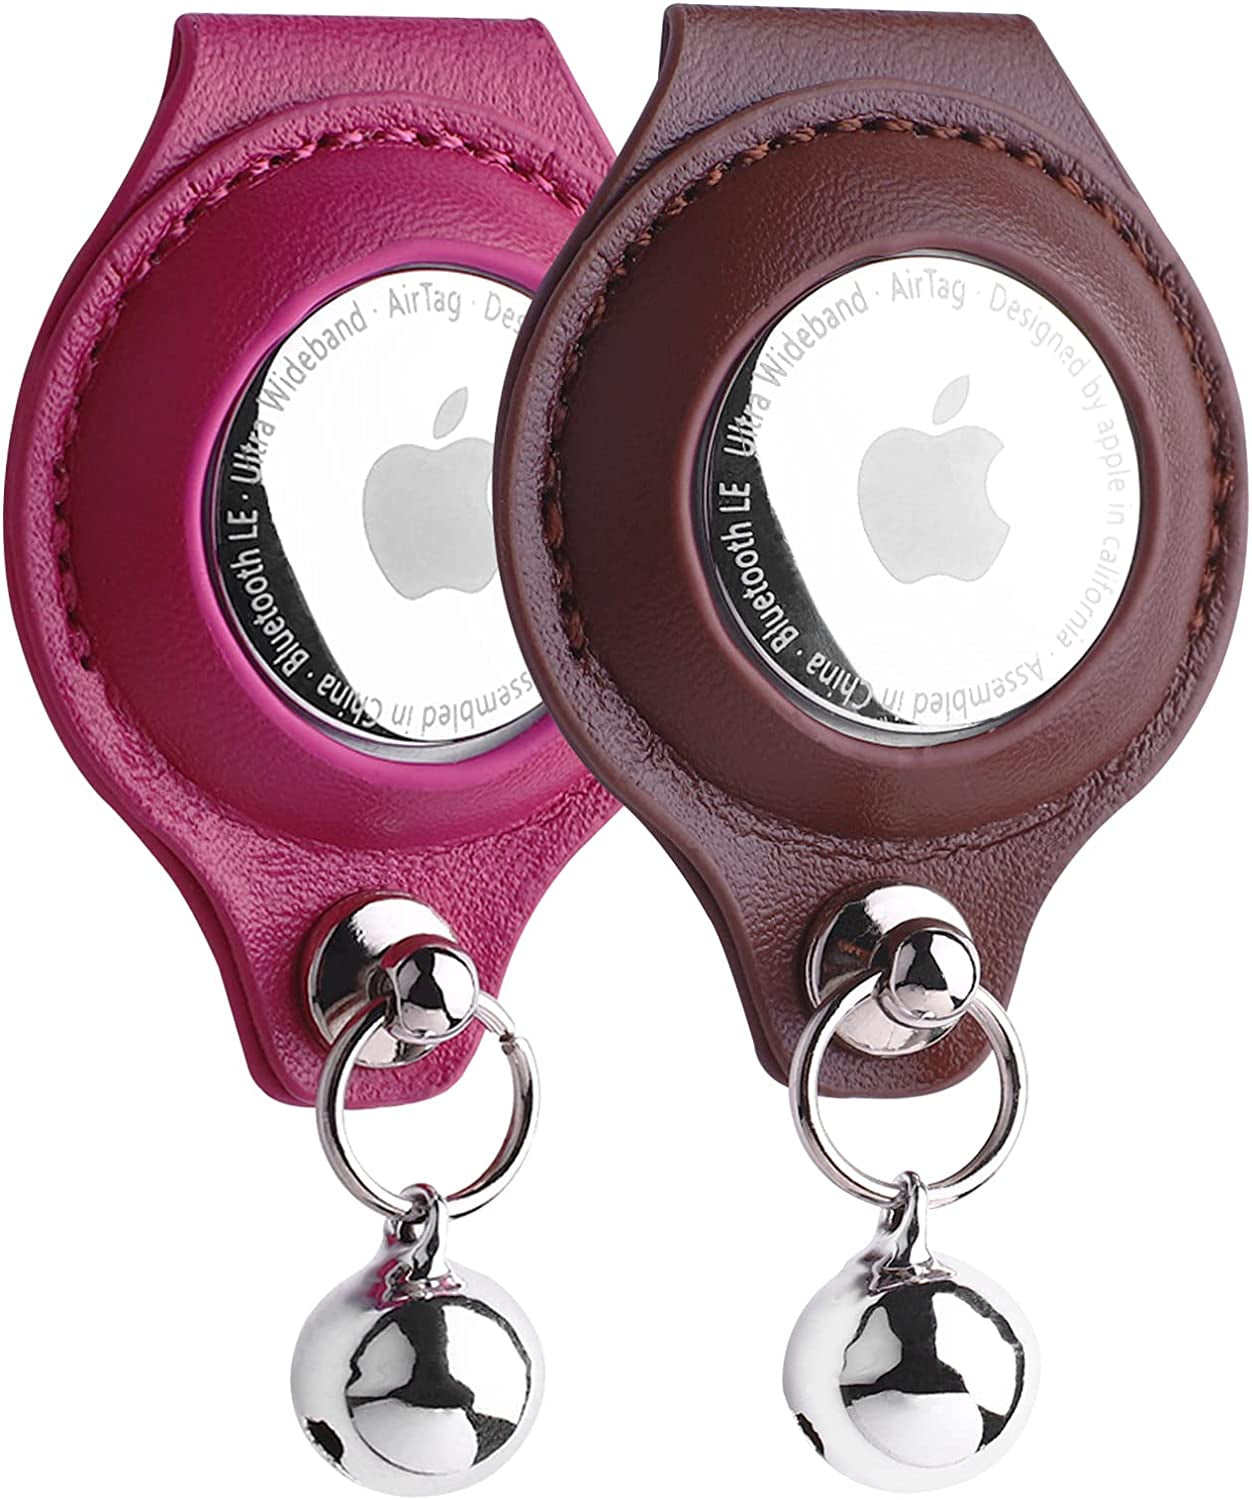 Decorbea Airtag Holder- Airtag Dog Collar Holder(2 Pack)- Dog Airtag Holder in Fashionable Design -PU Leather Pet Collar Case for Apple Airtags Electronics > GPS Accessories > GPS Cases Decorbea Airtag Holder Brown/Rose Red 